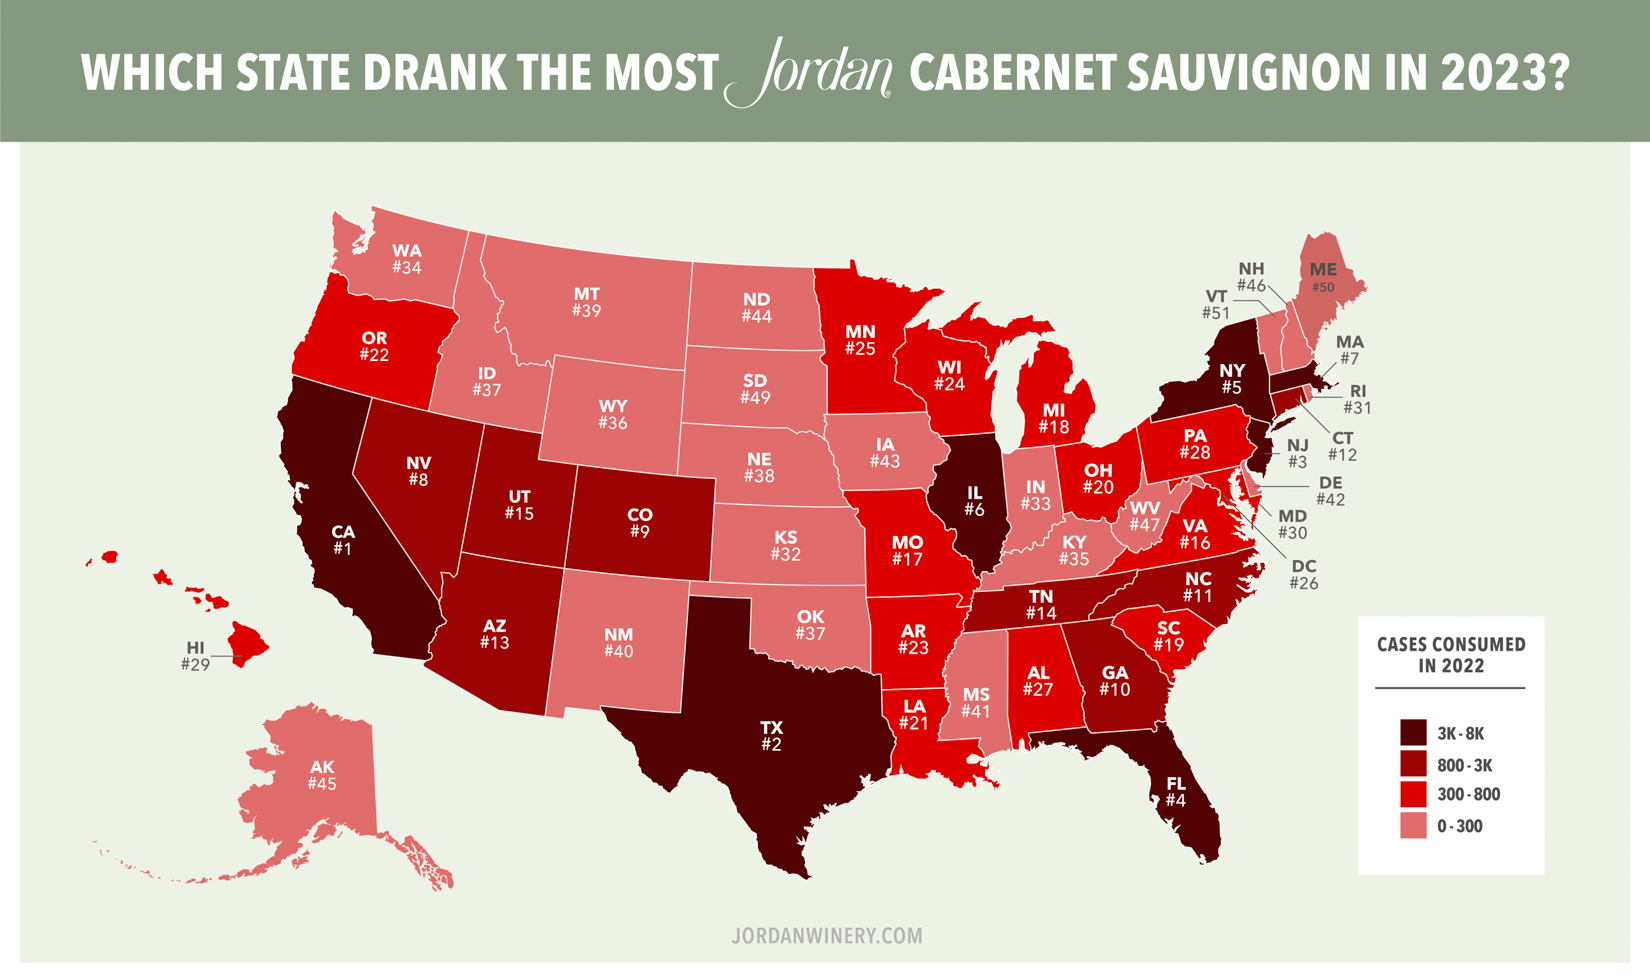 map of the united states with rankings of states that purchased the most cases of jordan cabernet sauvignon in 2023